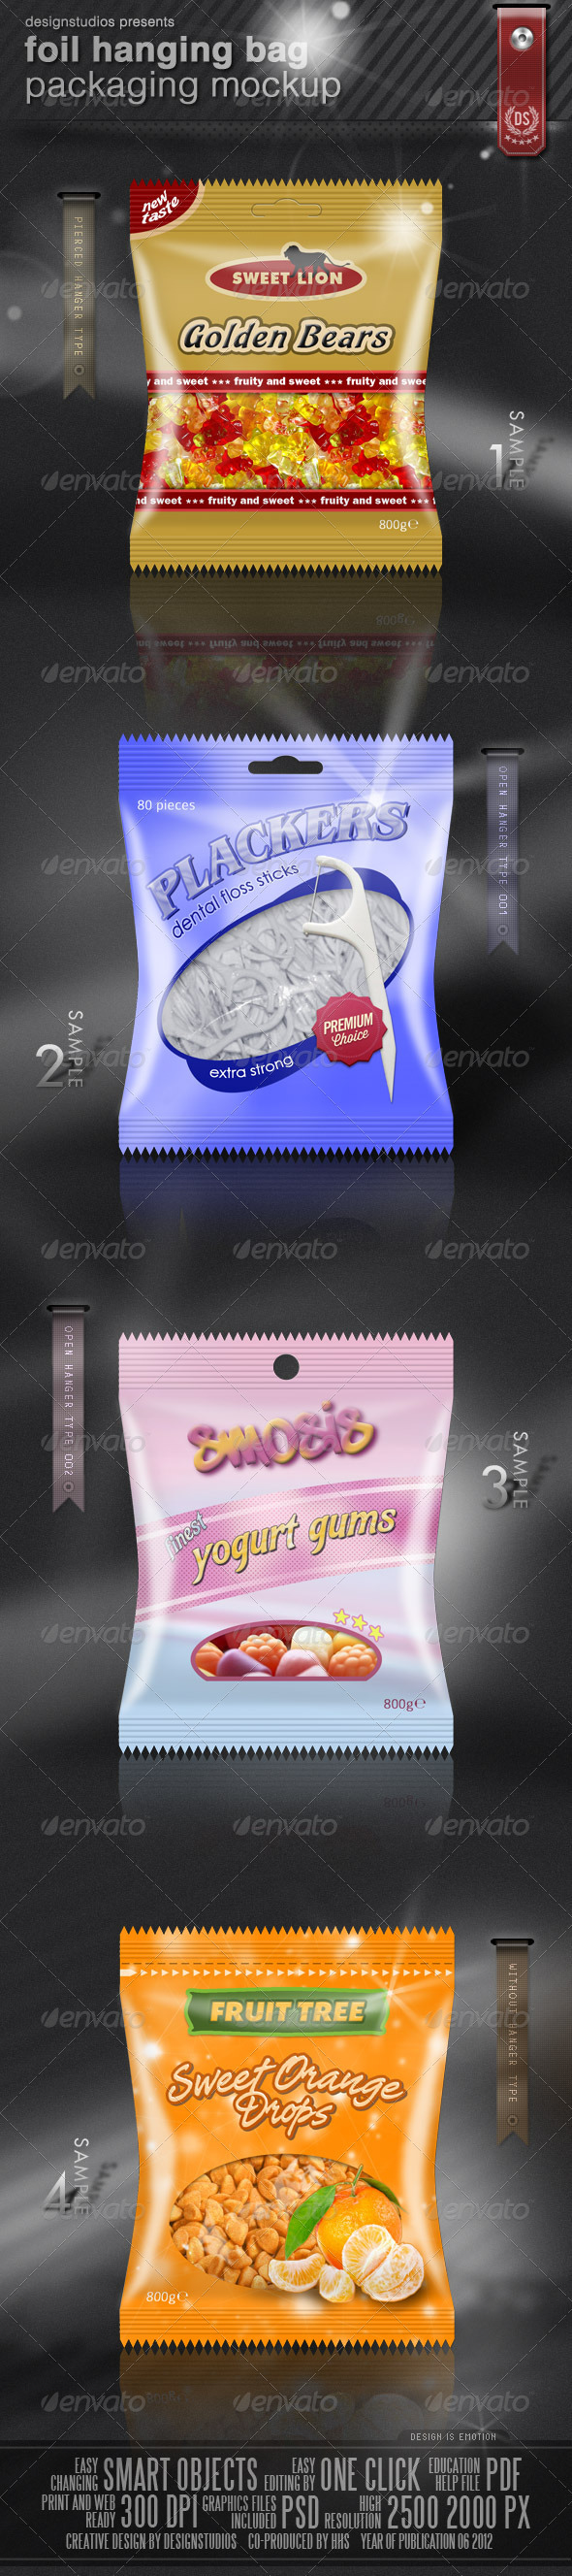 Download Stock Graphic - GraphicRiver Foil Hanging Bag Packaging ...